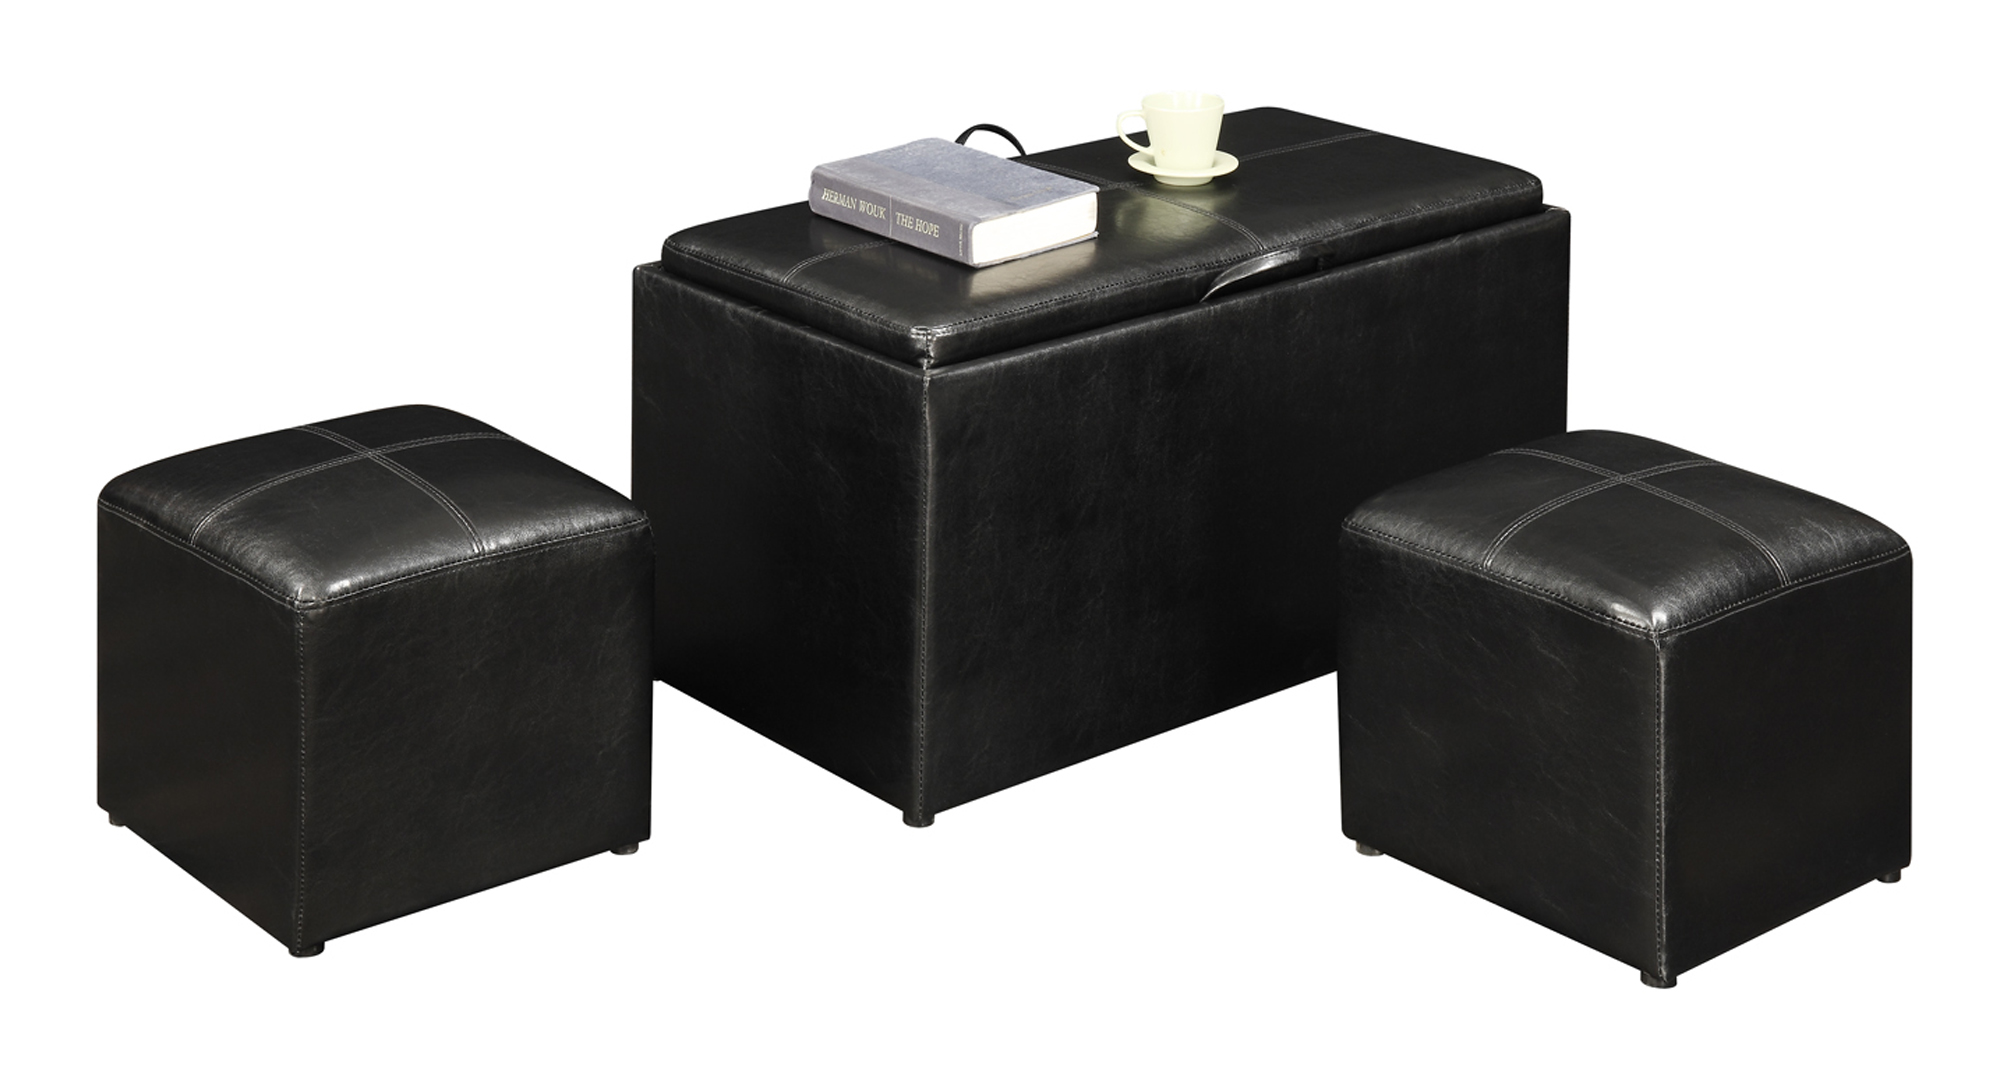 Convenience Concepts Designs4Comfort Sheridan Storage Bench with Reversible Tray and 2 Side Ottomans, Black Faux Leather - image 4 of 7